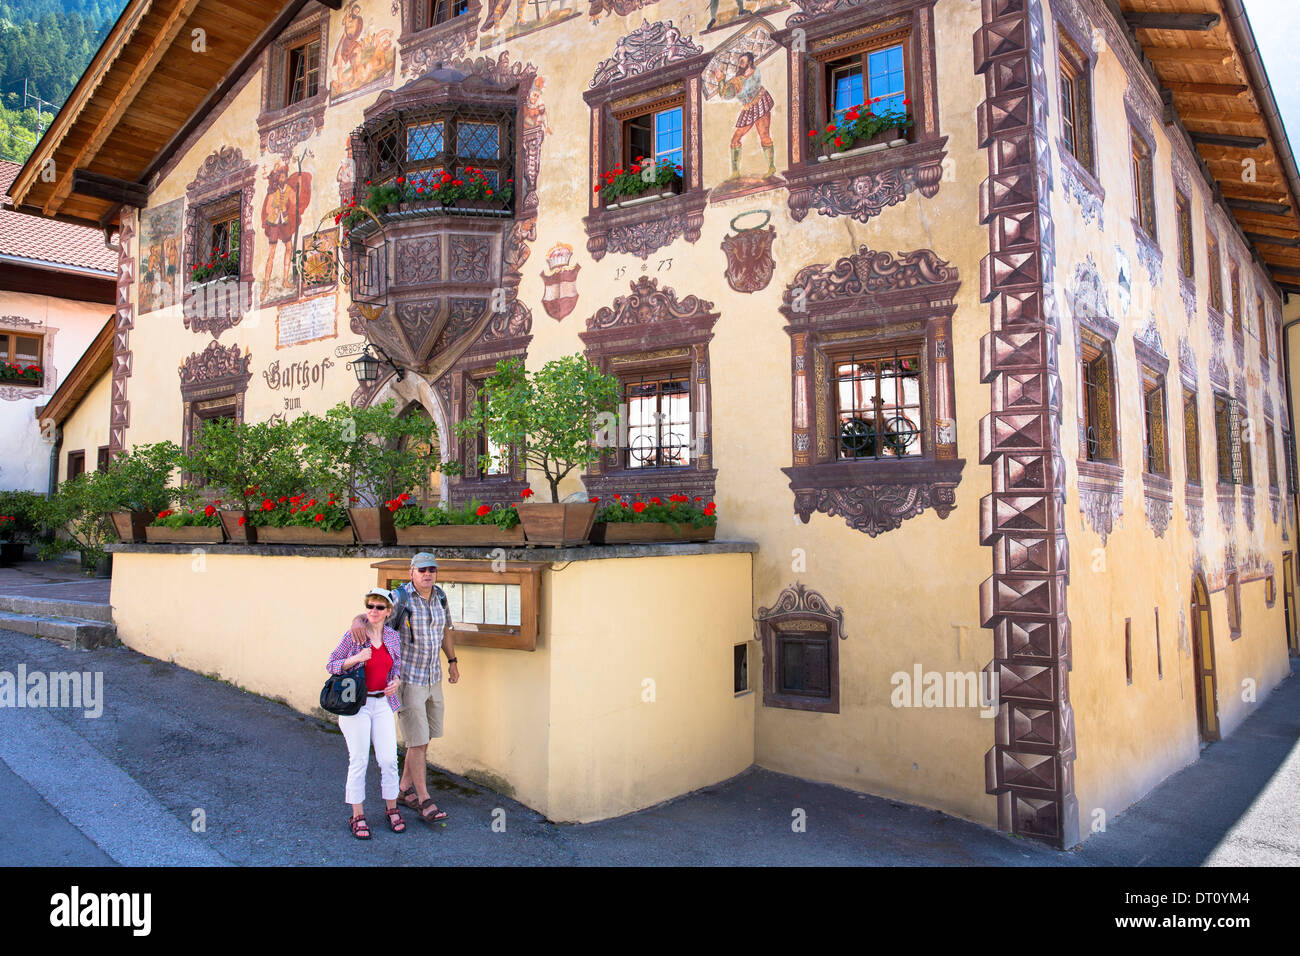 Page 3 - Gasthof High Resolution Stock Photography and Images - Alamy